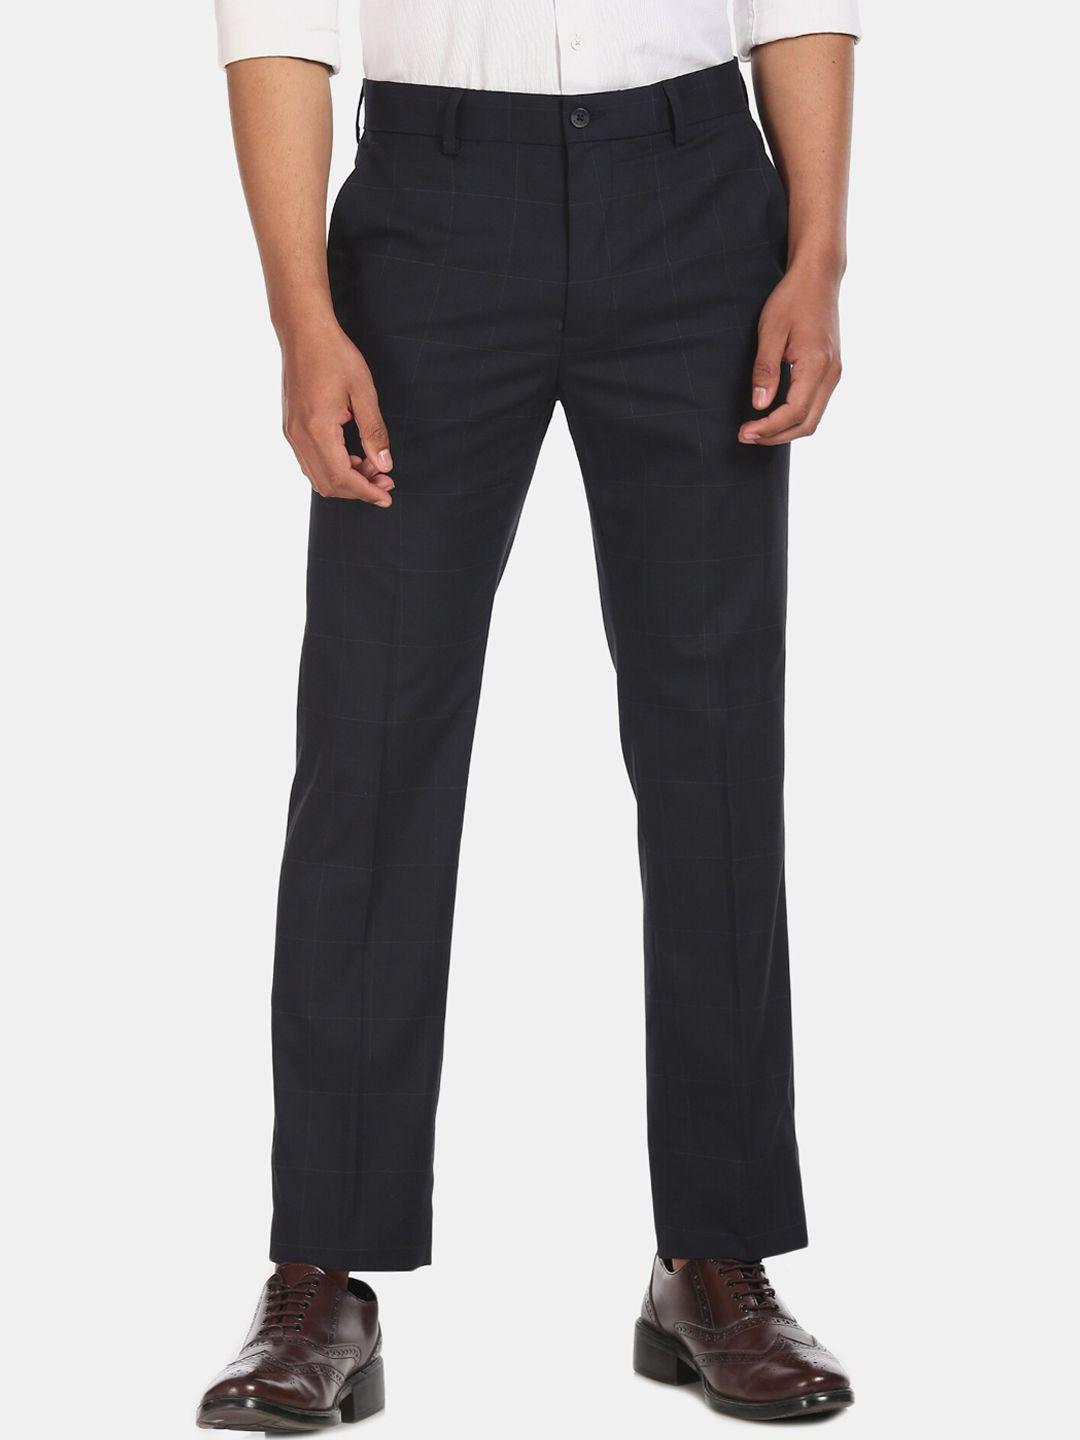 excalibur-men-navy-blue-regular-fit-checked-formal-trousers